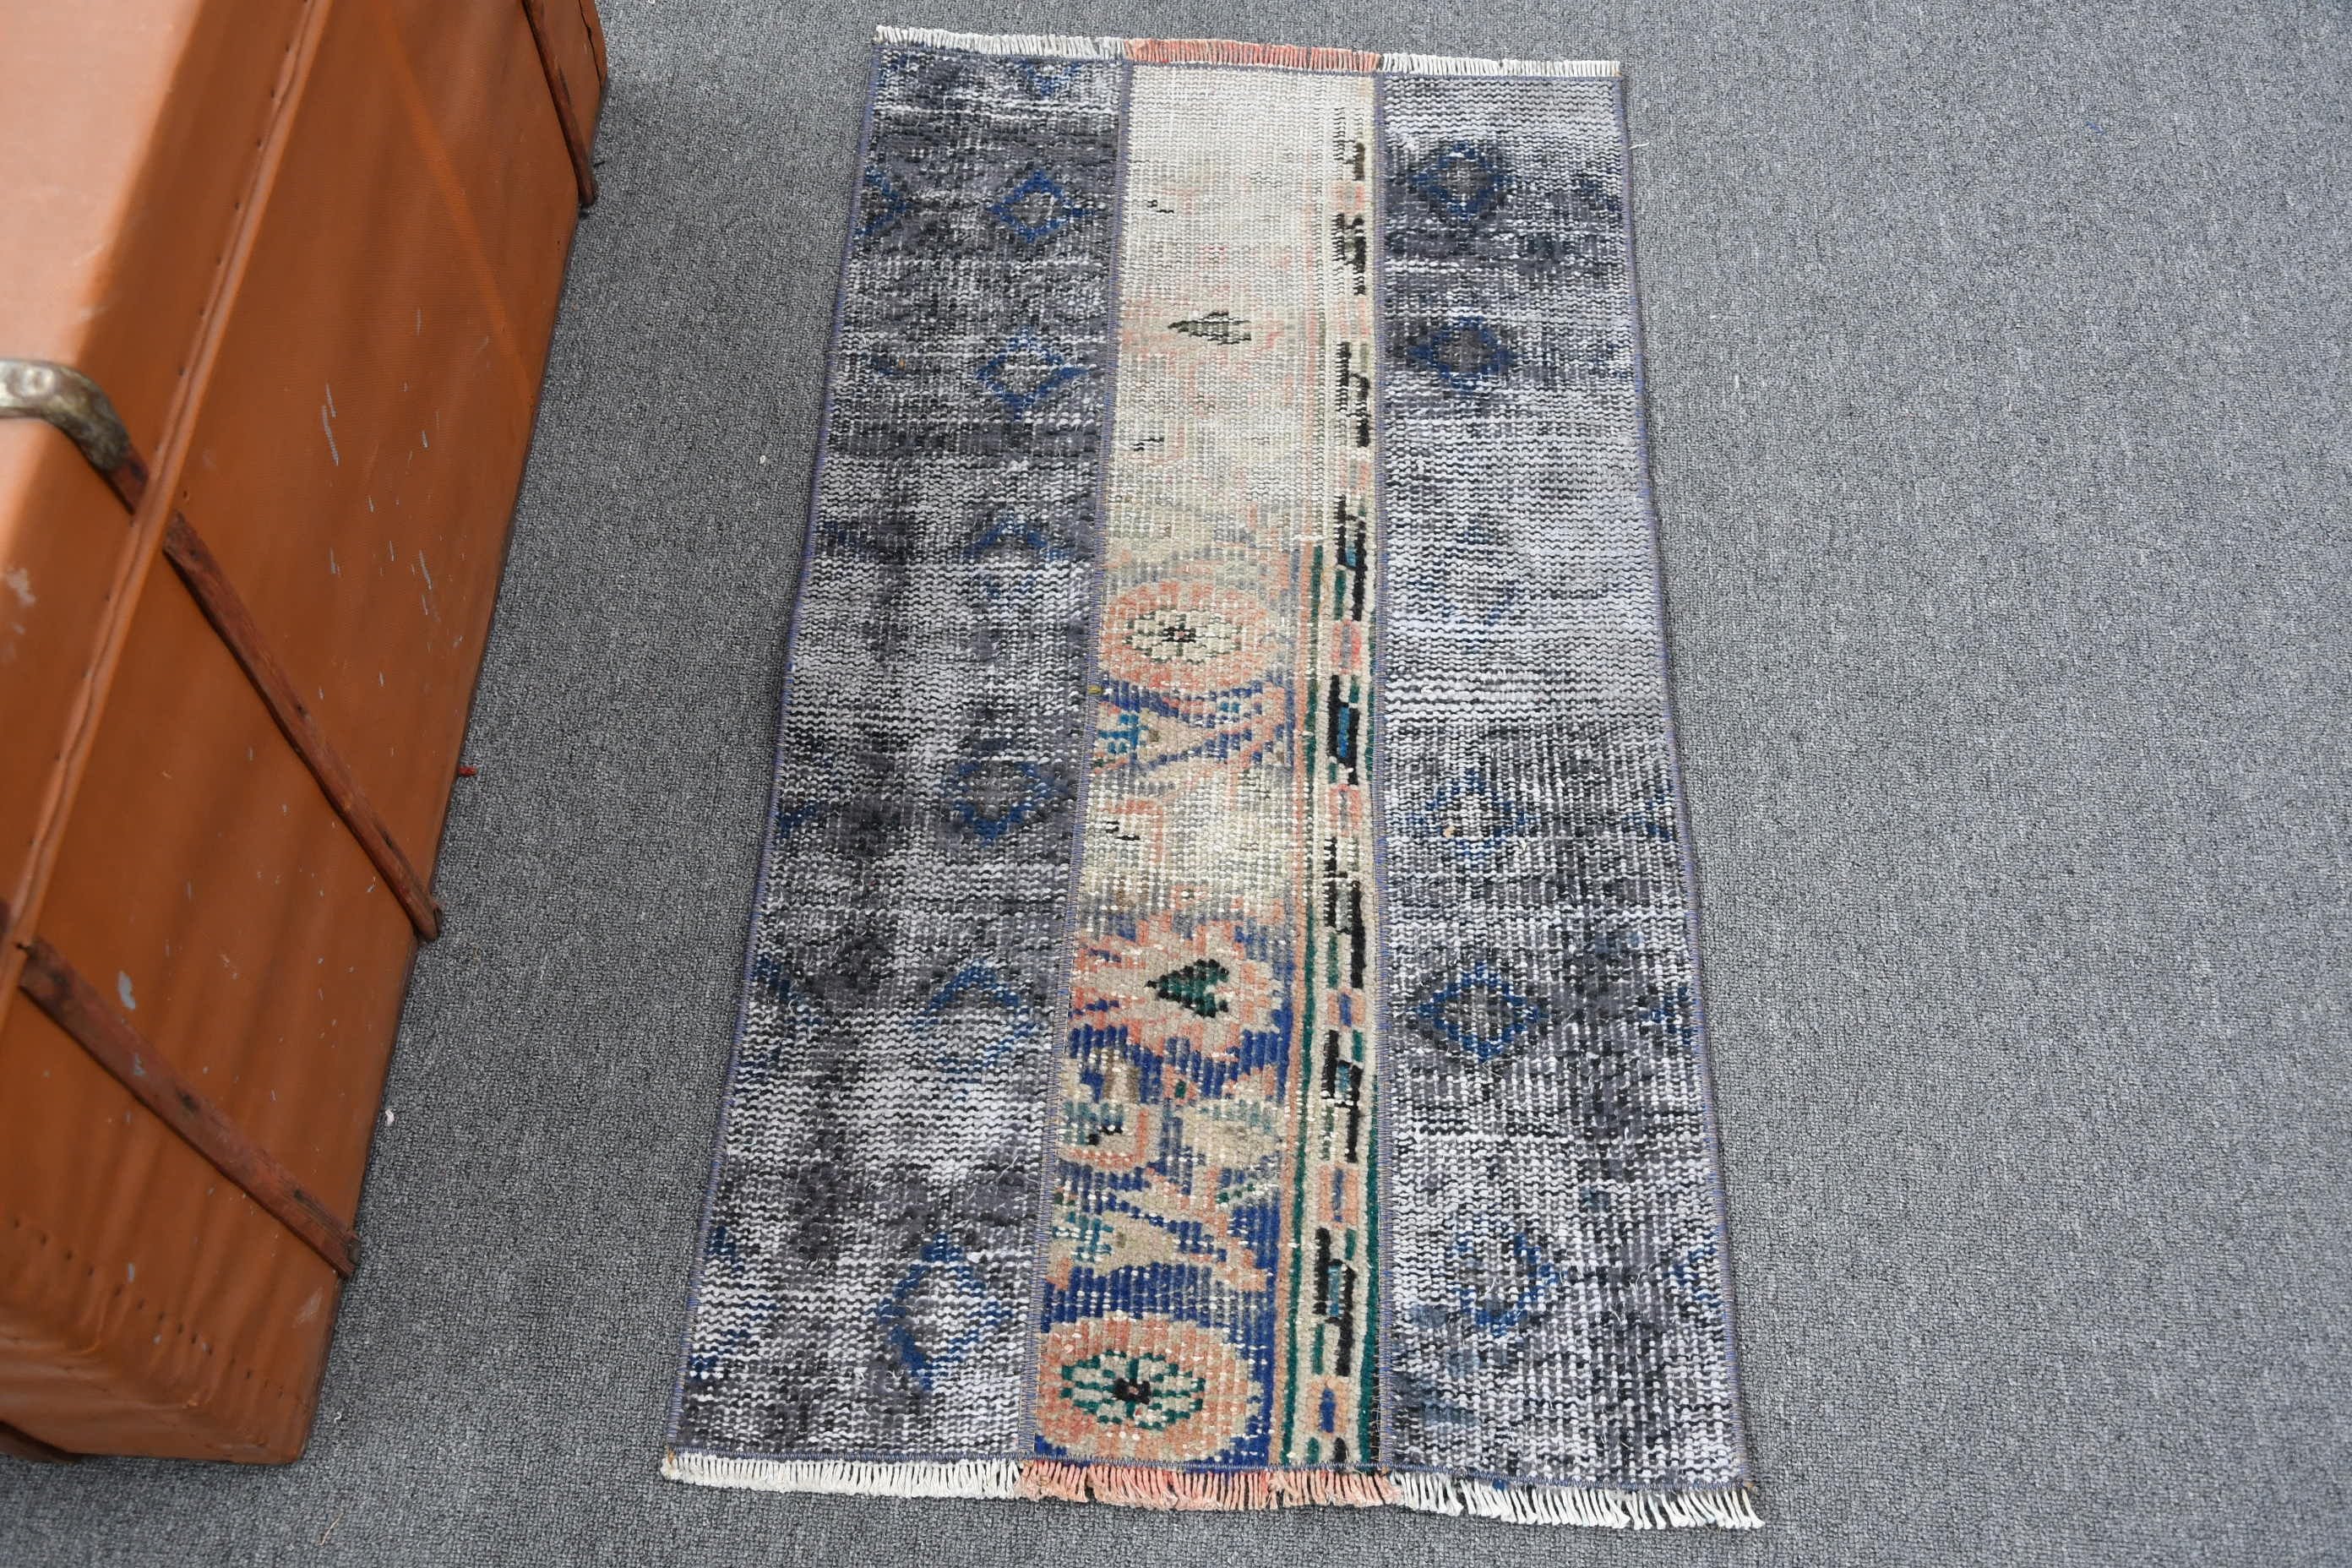 Wall Hanging Rug, Vintage Rug, Retro Rugs, Kitchen Rug, Oushak Rug, Rugs for Entry, Turkish Rugs, 1.8x3.2 ft Small Rugs, Door Mat Rug